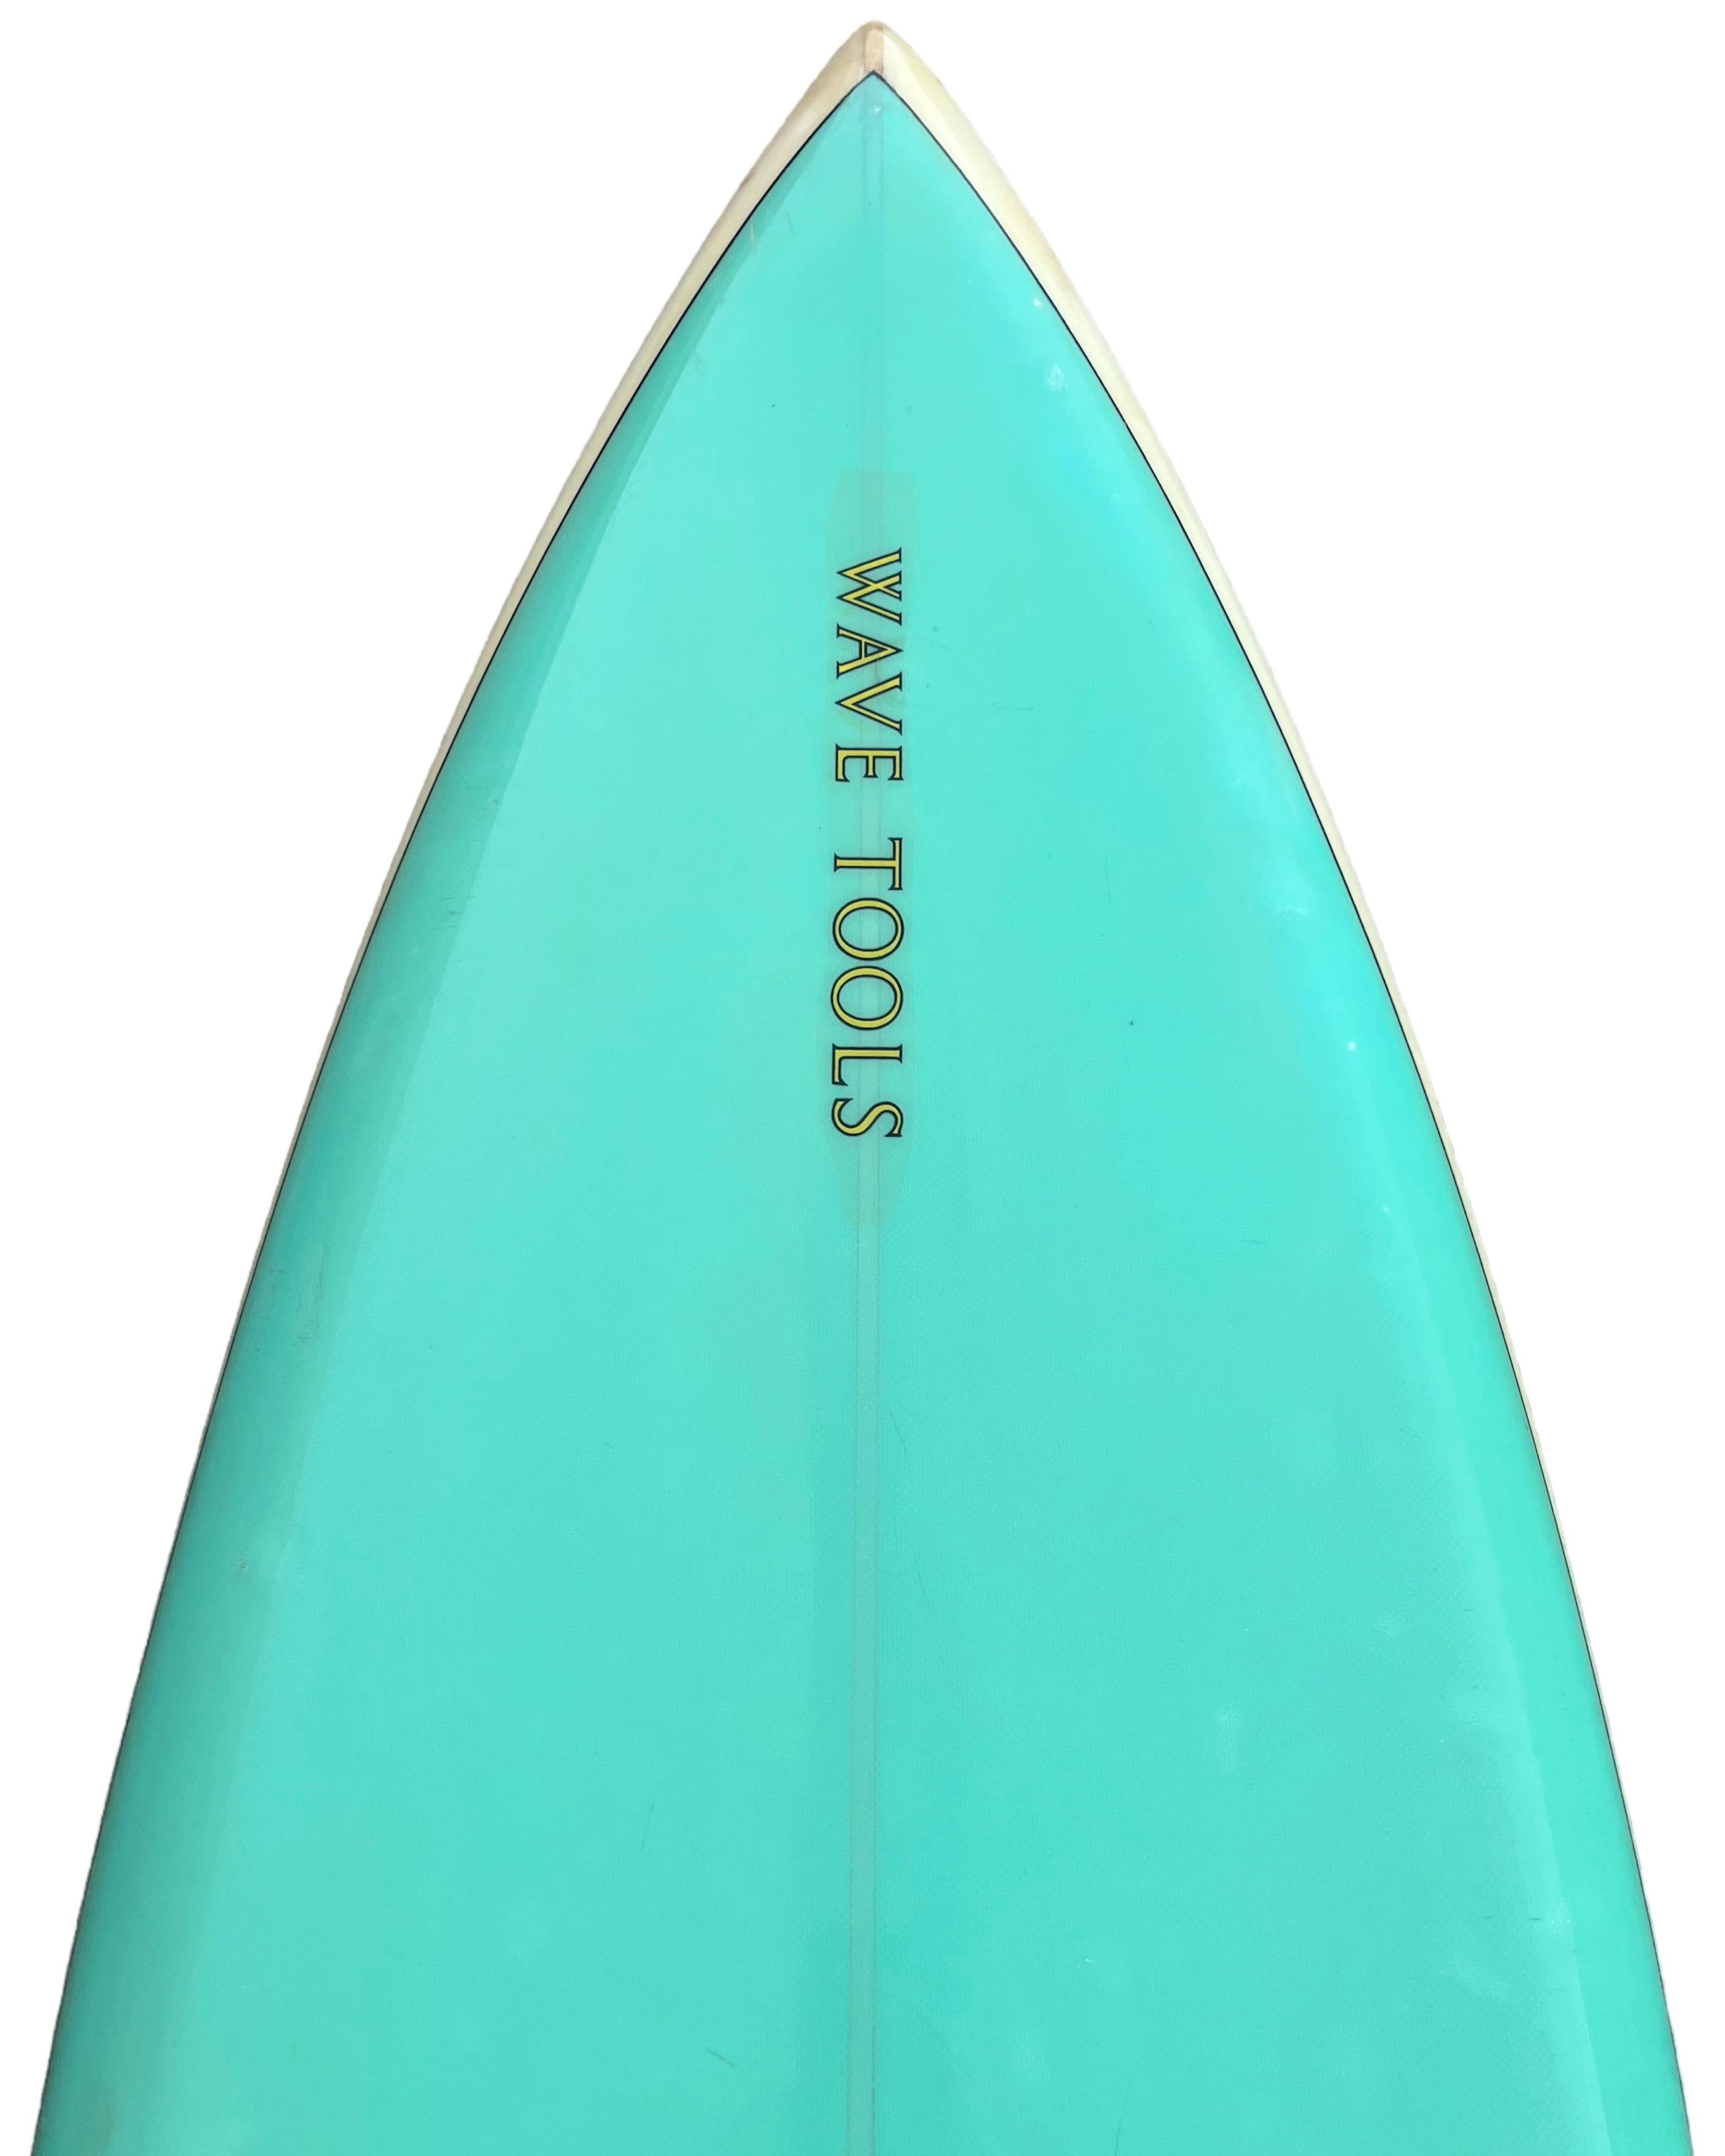 American 1970s Vintage Wave Tools Surfboard by Lance Collins